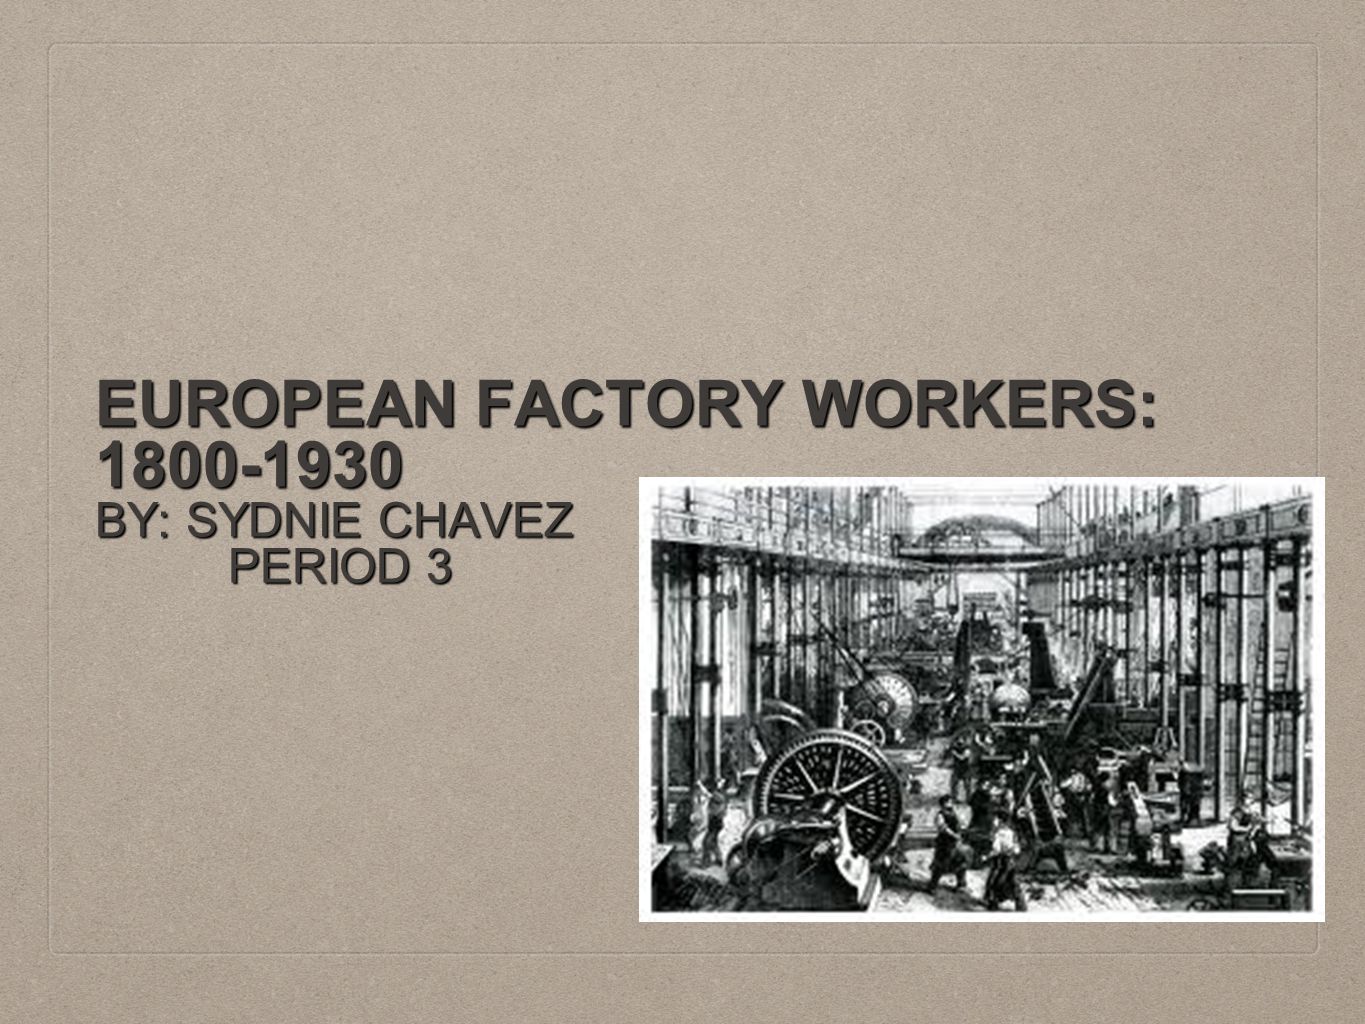 EUROPEAN FACTORY WORKERS: BY: SYDNIE CHAVEZ PERIOD 3 PERIOD 3